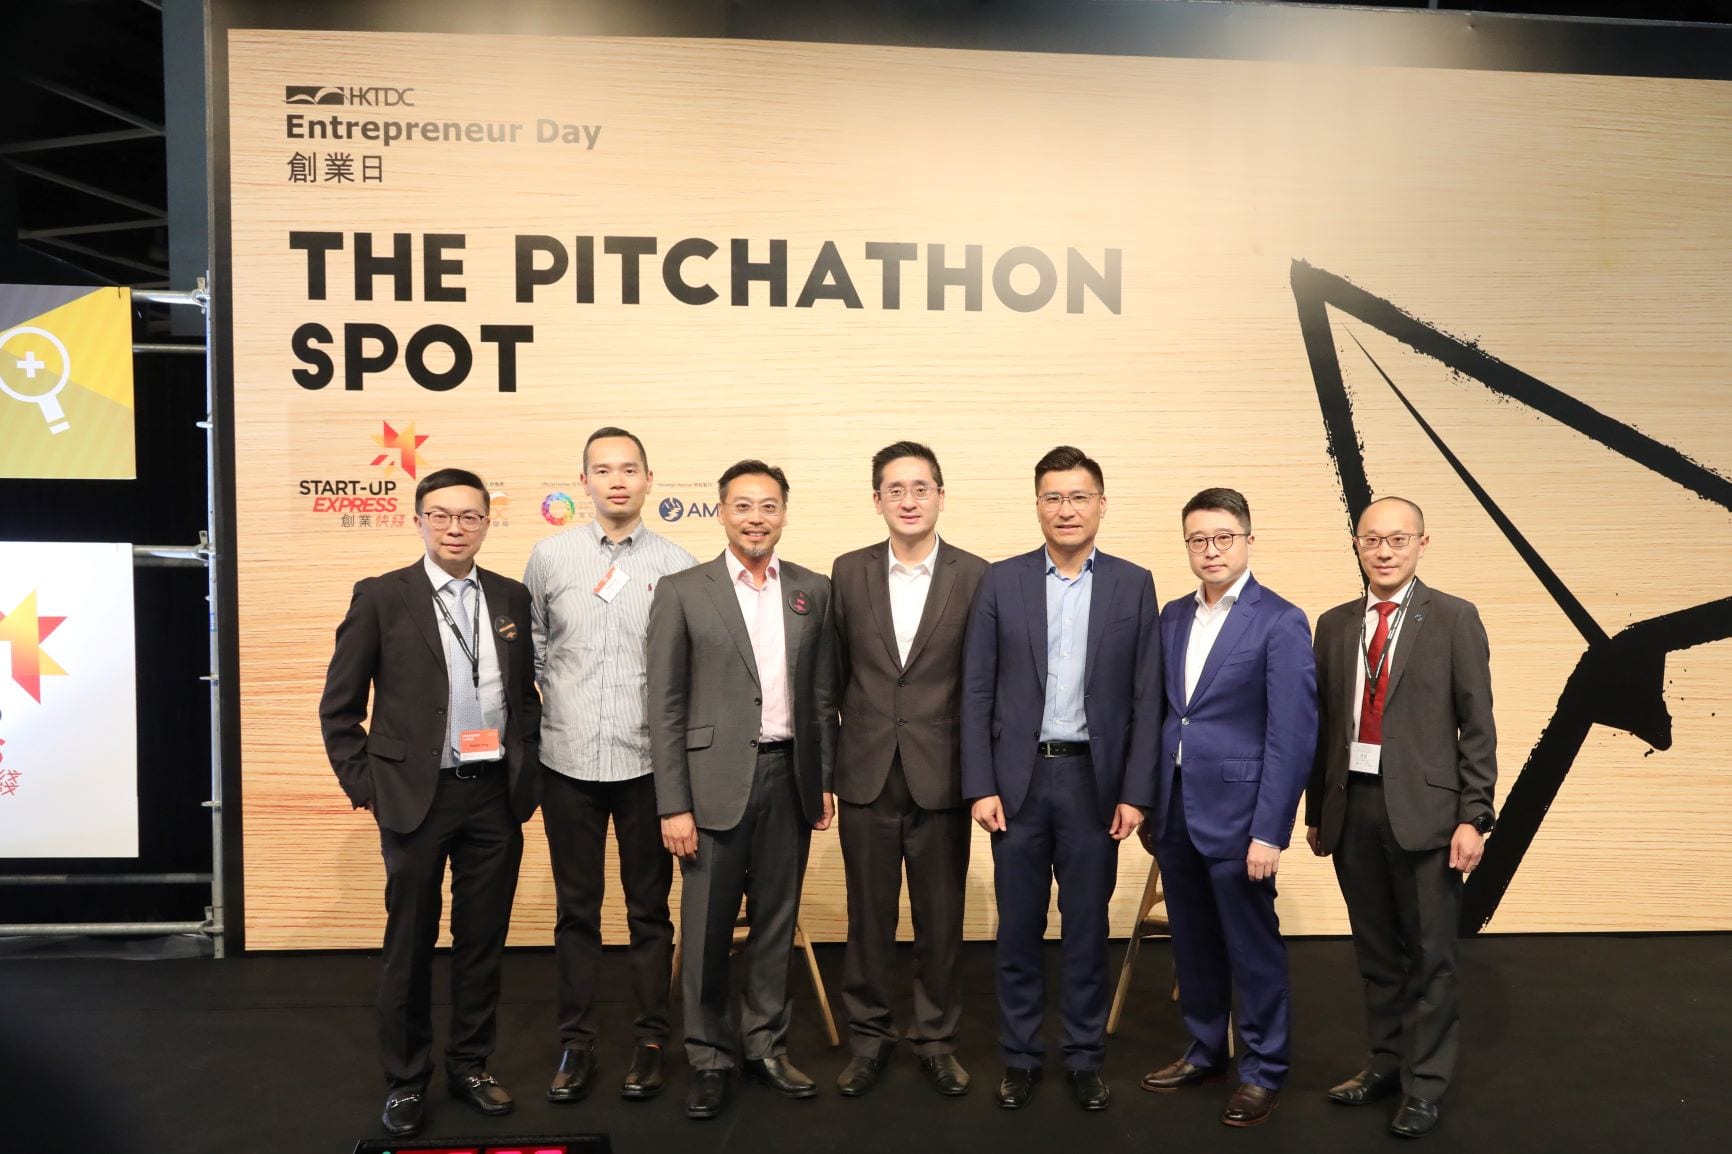 AMTD Group hosted the second Start-up Express Pitching Final jointly with HKTDC and Our Hong Kong Foundation